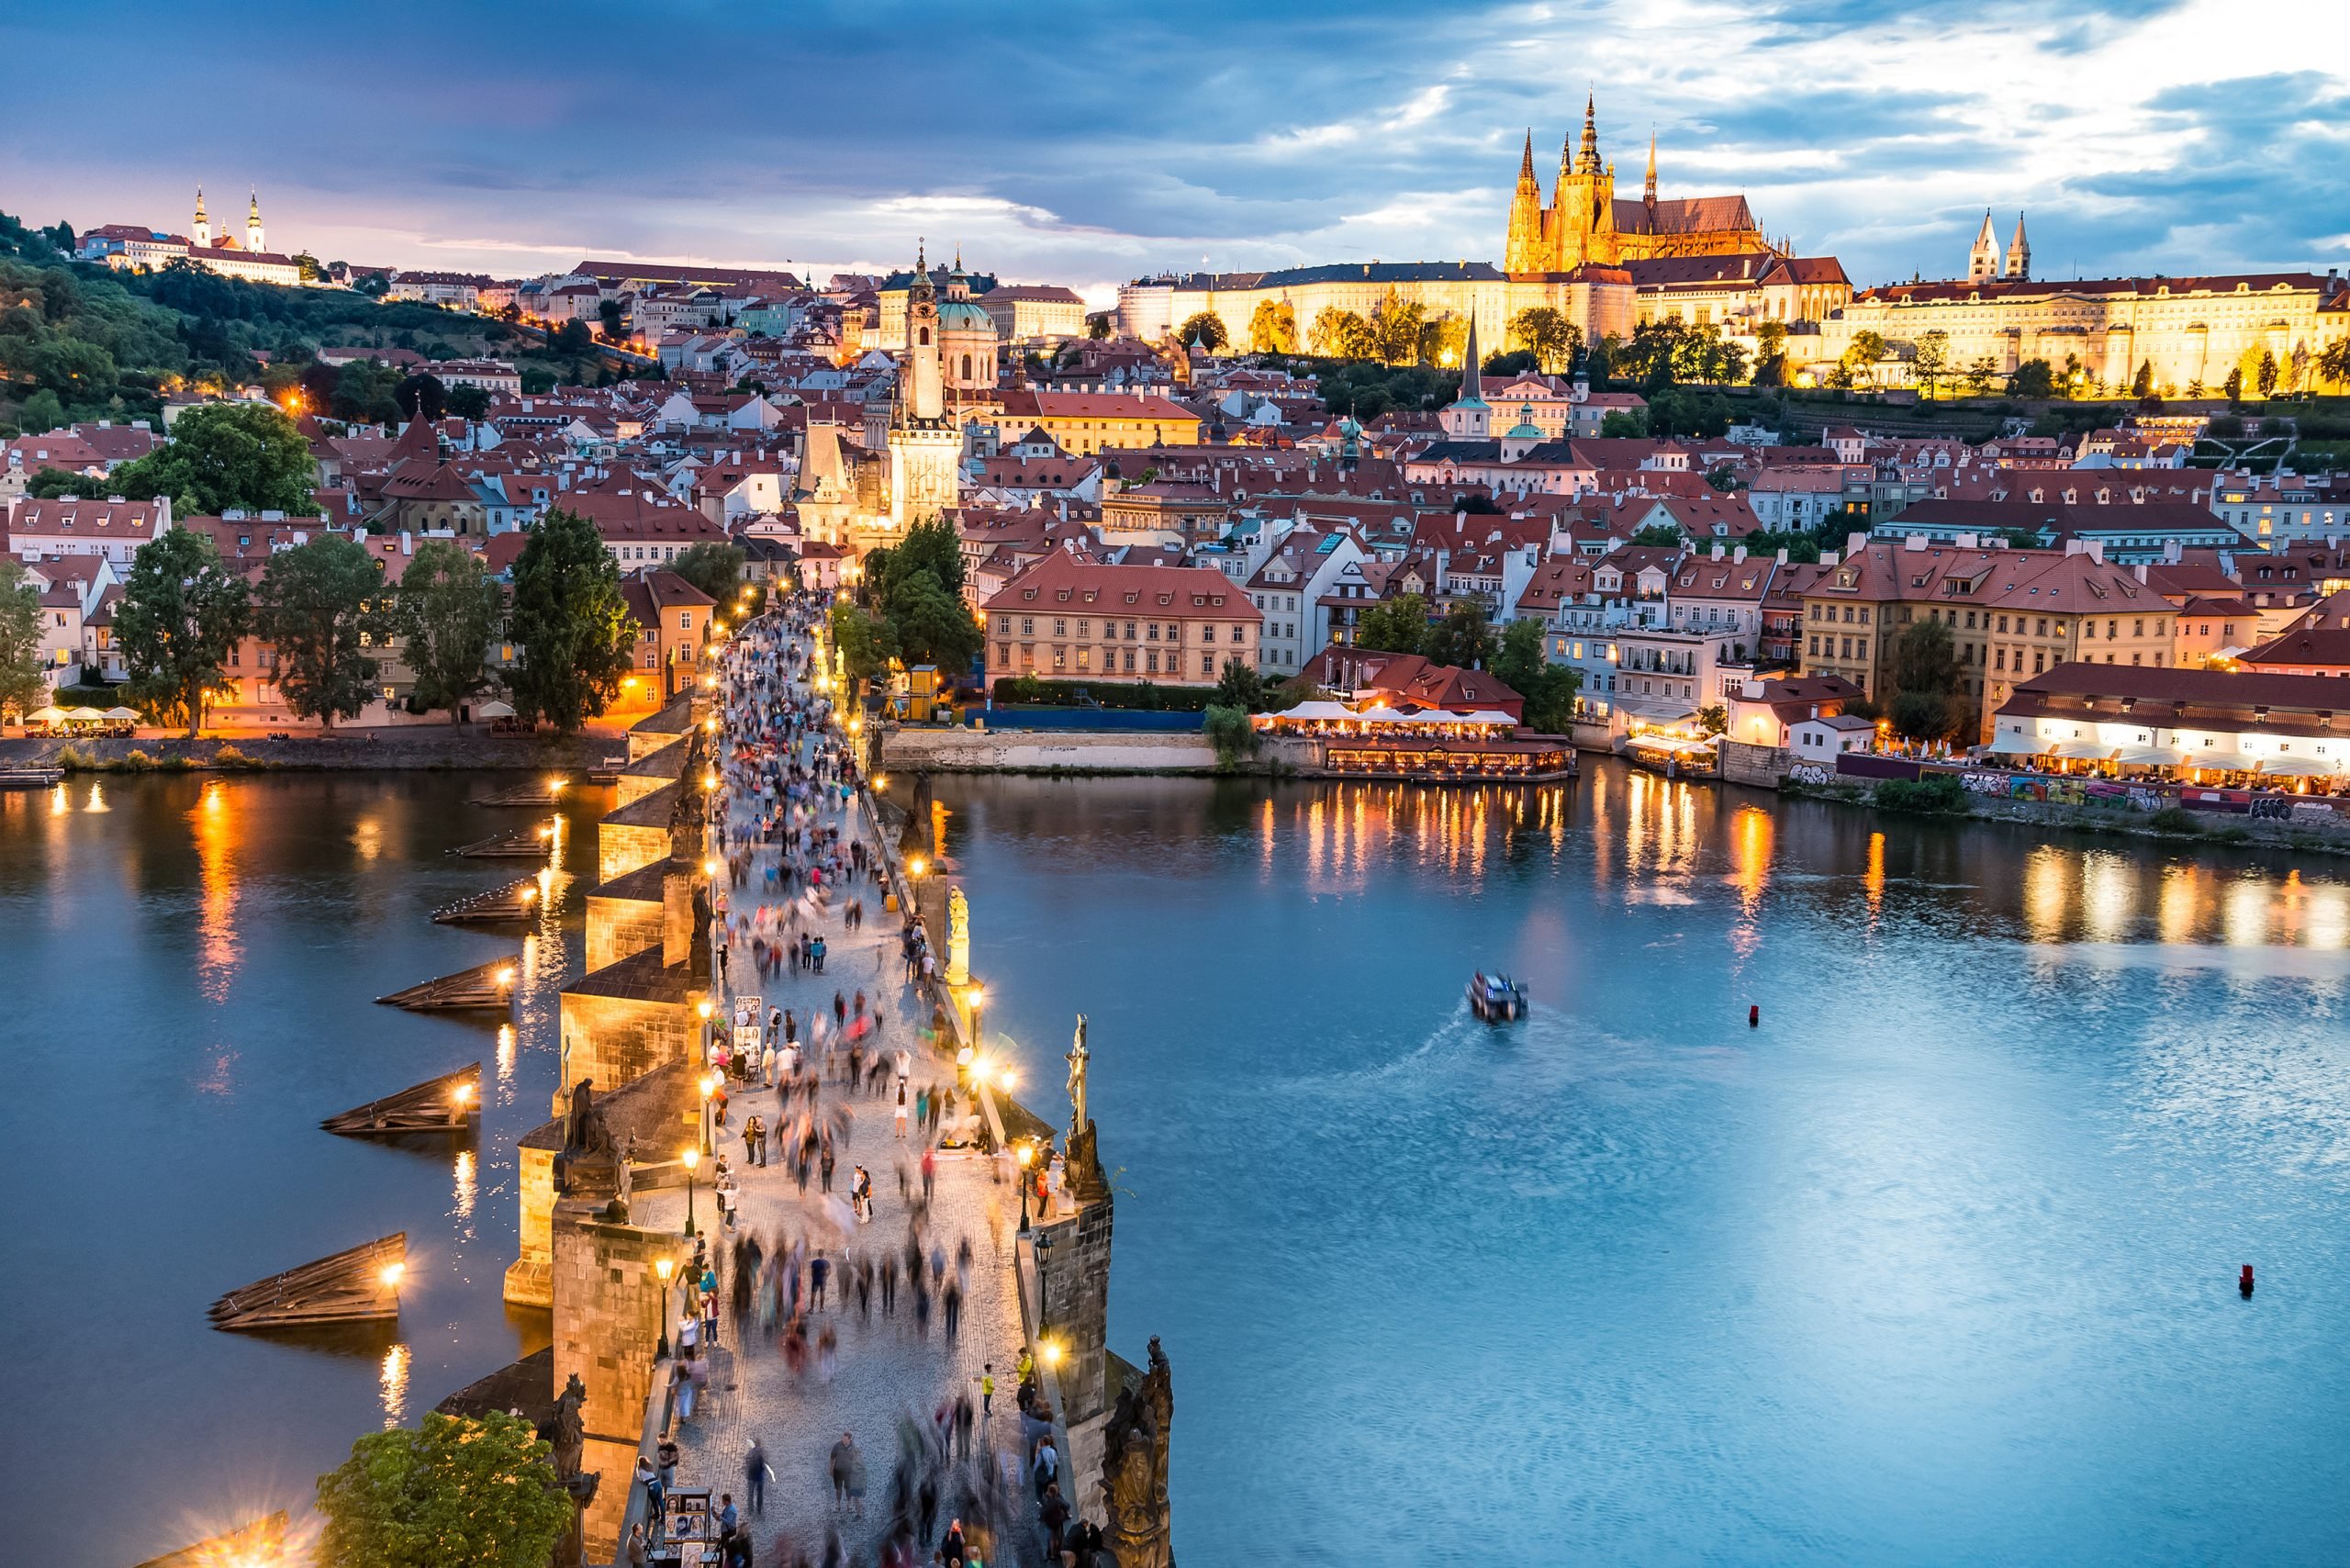 sunset over the charles river from above with prague castle in the background, beautiful view of prague, one of the most romantic cities in europe